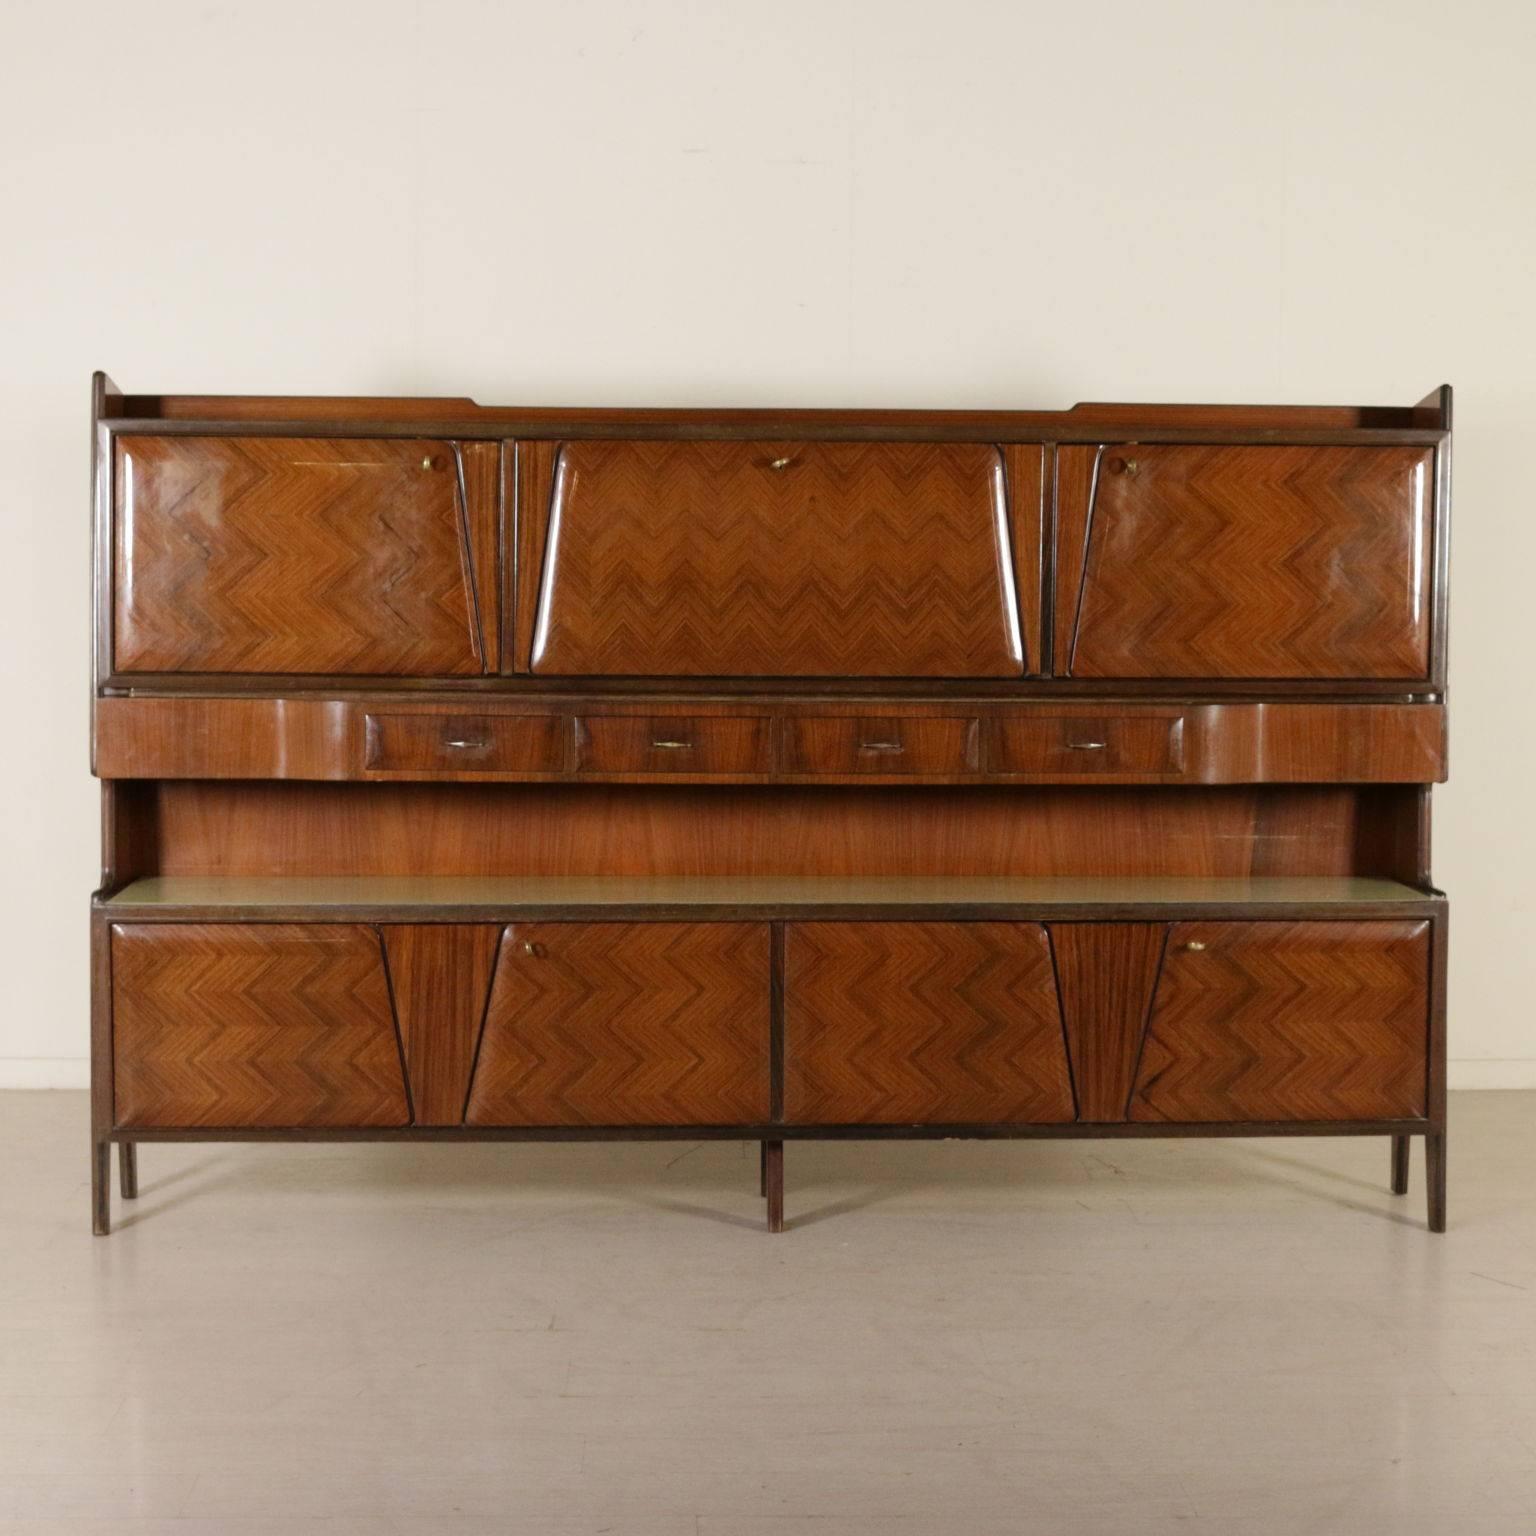 A cupboard with central drop-leaf secretaire, rosewood veneer, retro treated glass, marble effect. Manufactured in Italy by La Permanente Mobili Cantù, 1950s-1960s.